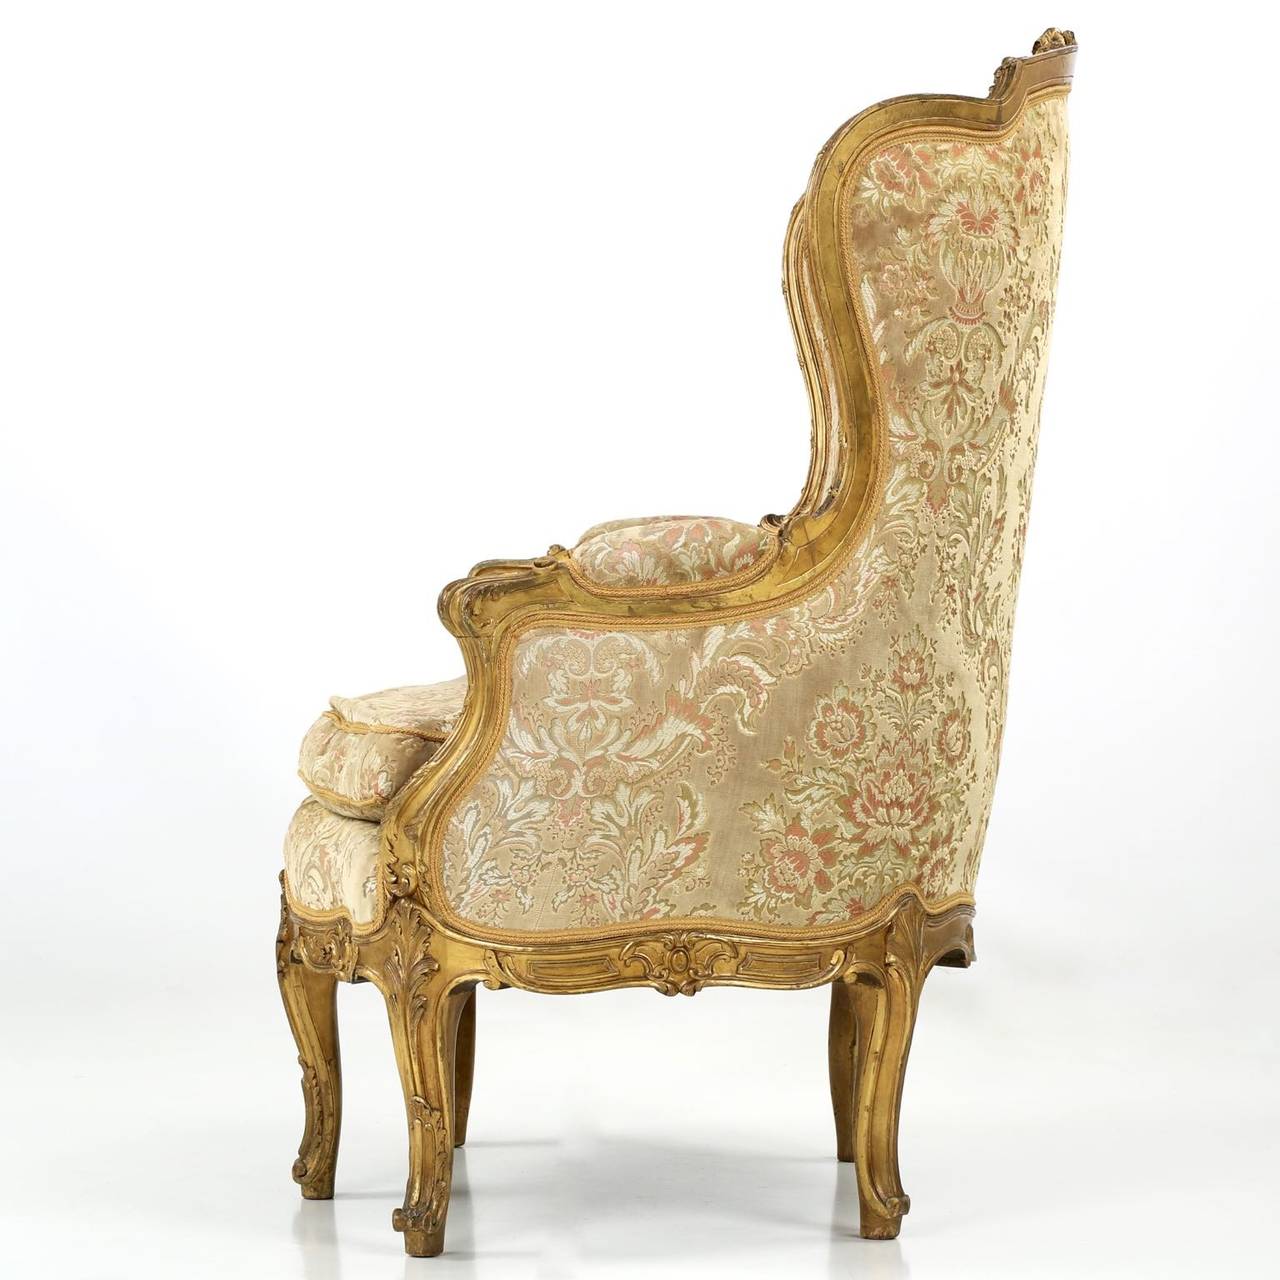 19th Century Louis XV Style Carved Giltwood Antique Bergere Armchair, circa 1870